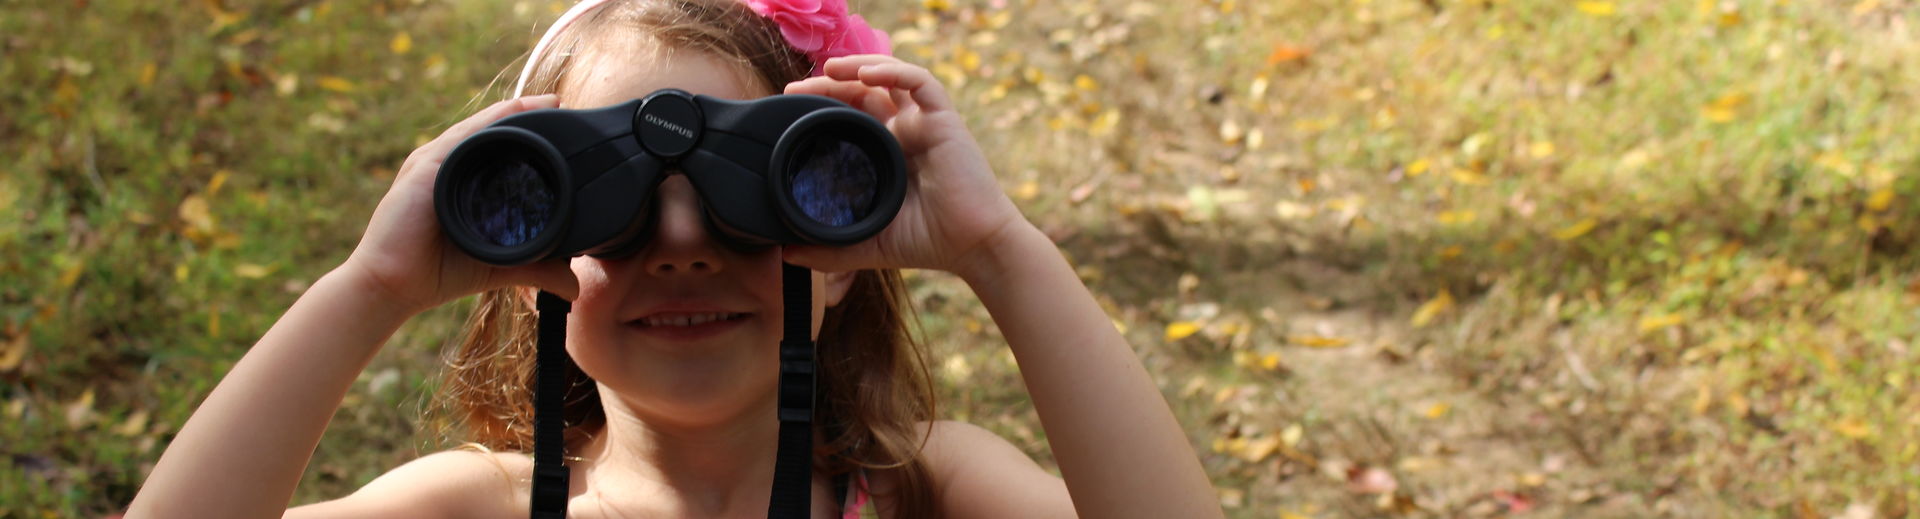 a girl with binoculars looking back at the camera